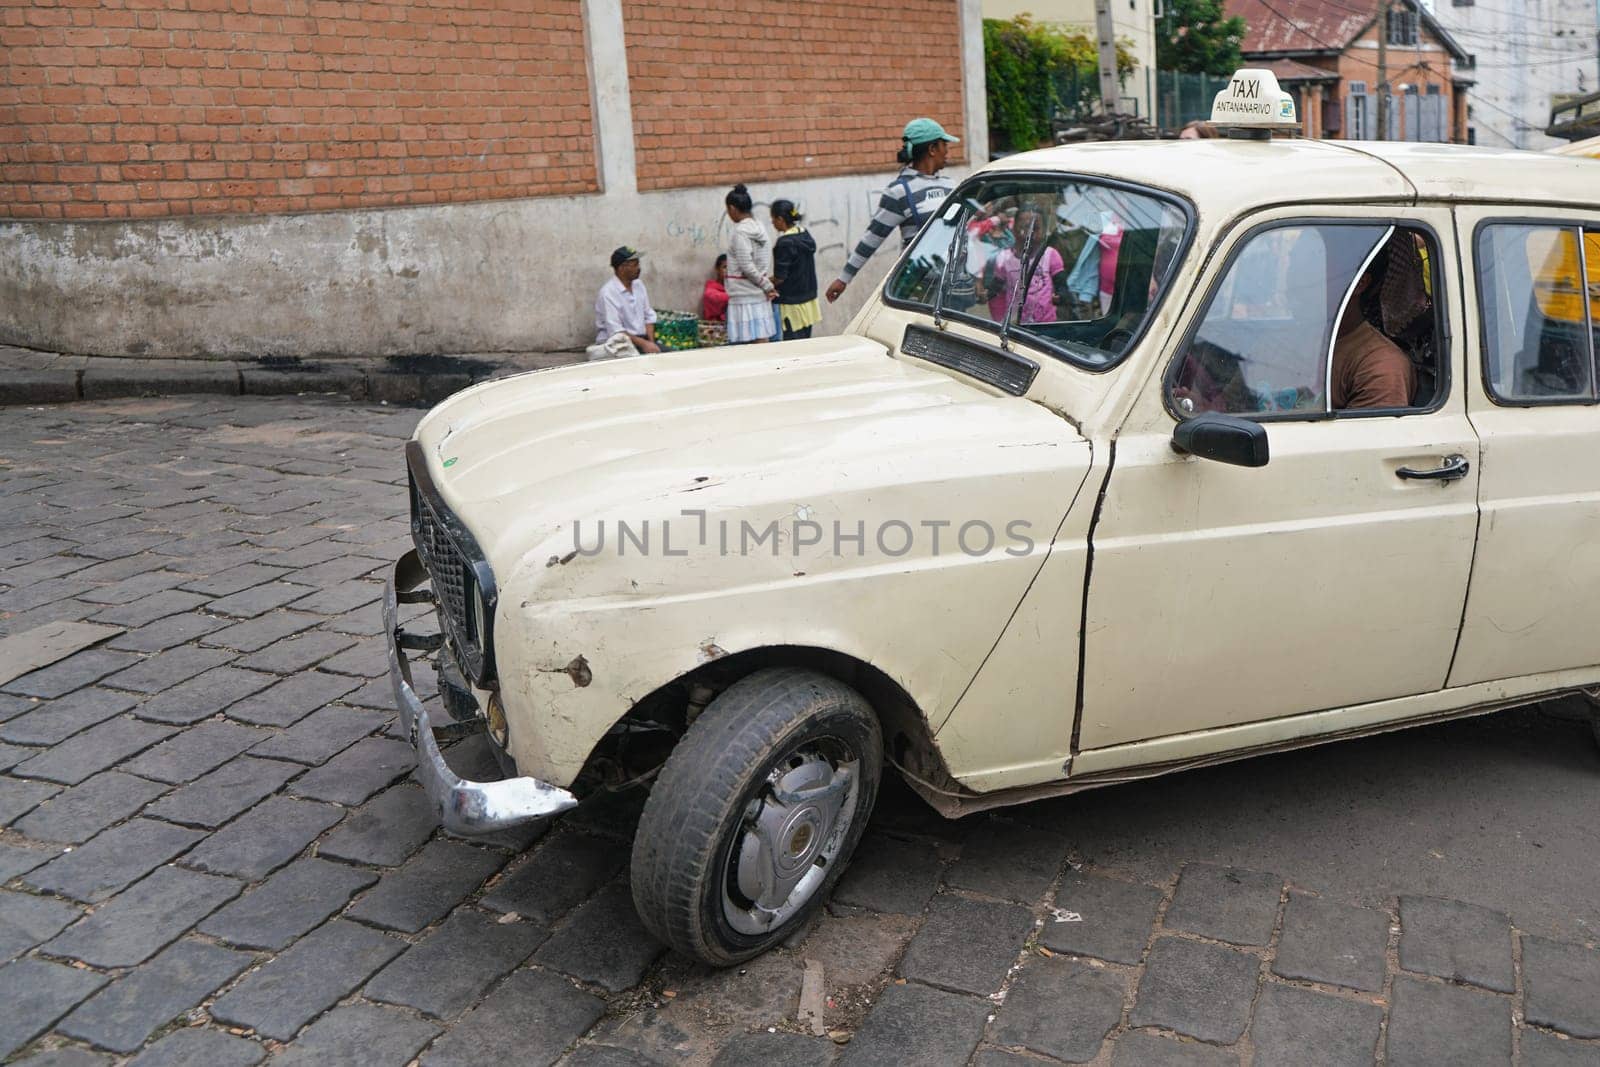 Antananarivo, Madagascar - April 24, 2019: White taxi car driving slowly over tile stone road, group of unknown Malagasy people in background. Madagascar is poor country, most vehicles are worn out by Ivanko